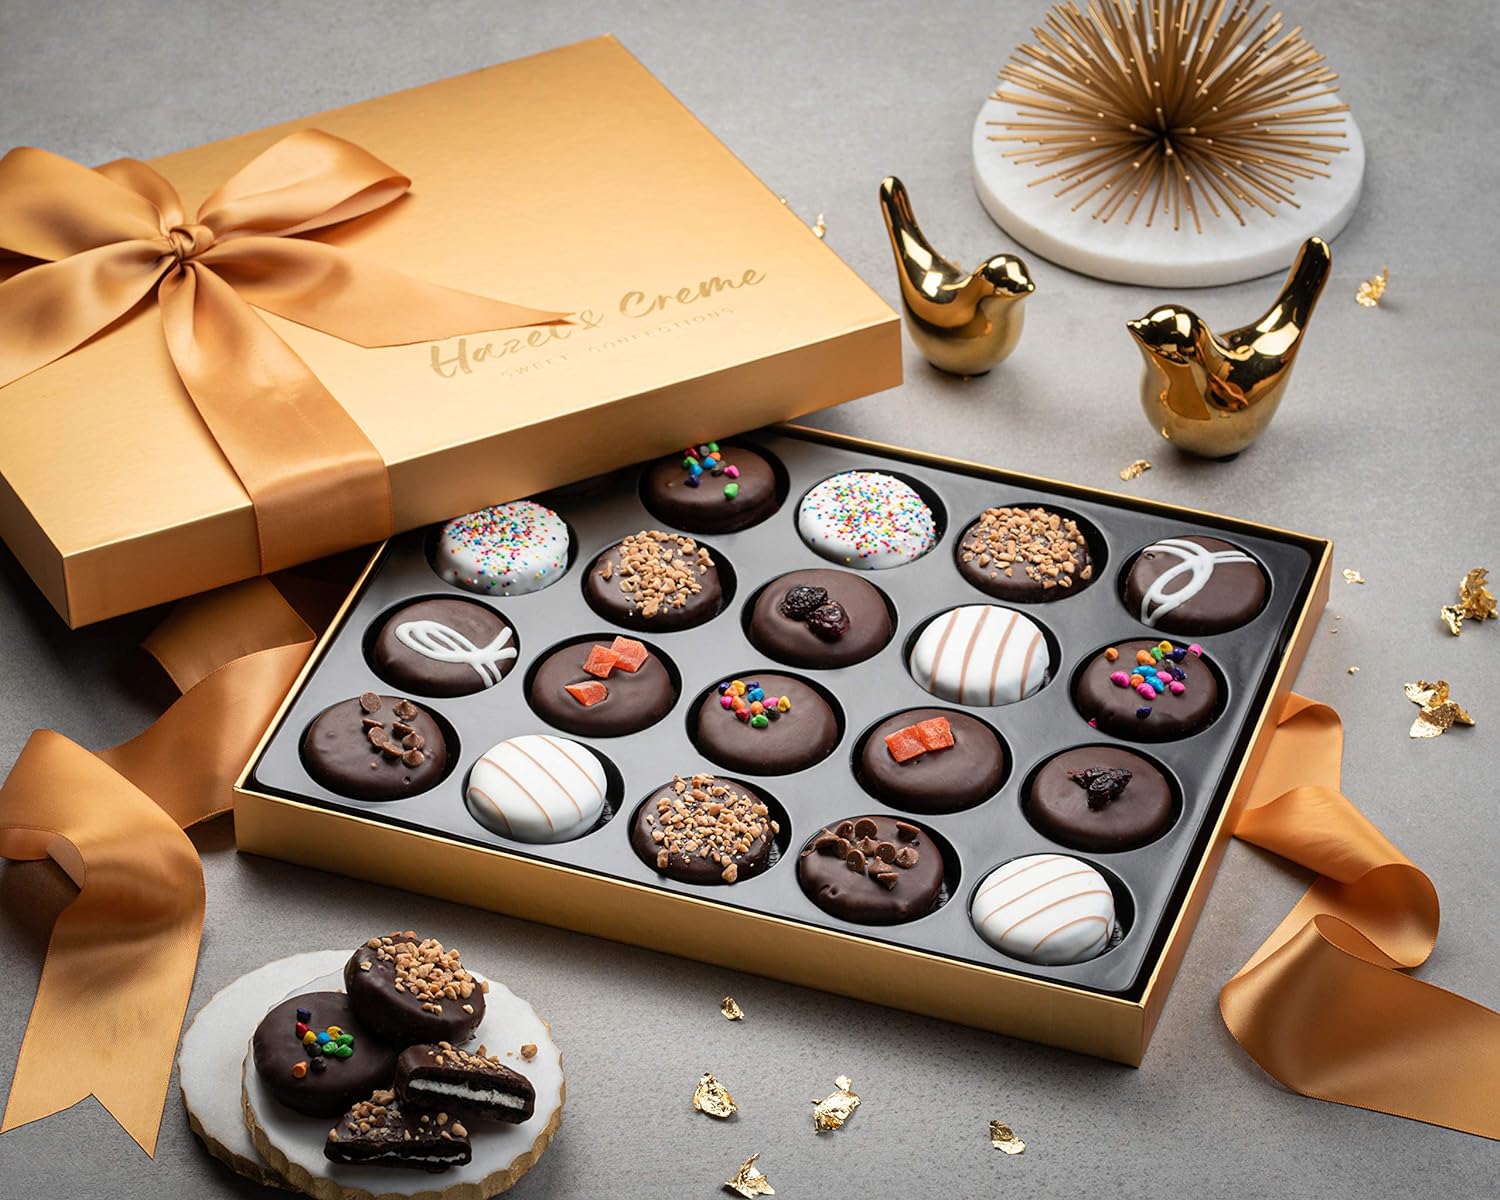 Delicious Chocolate Sampler: A Tasty Review